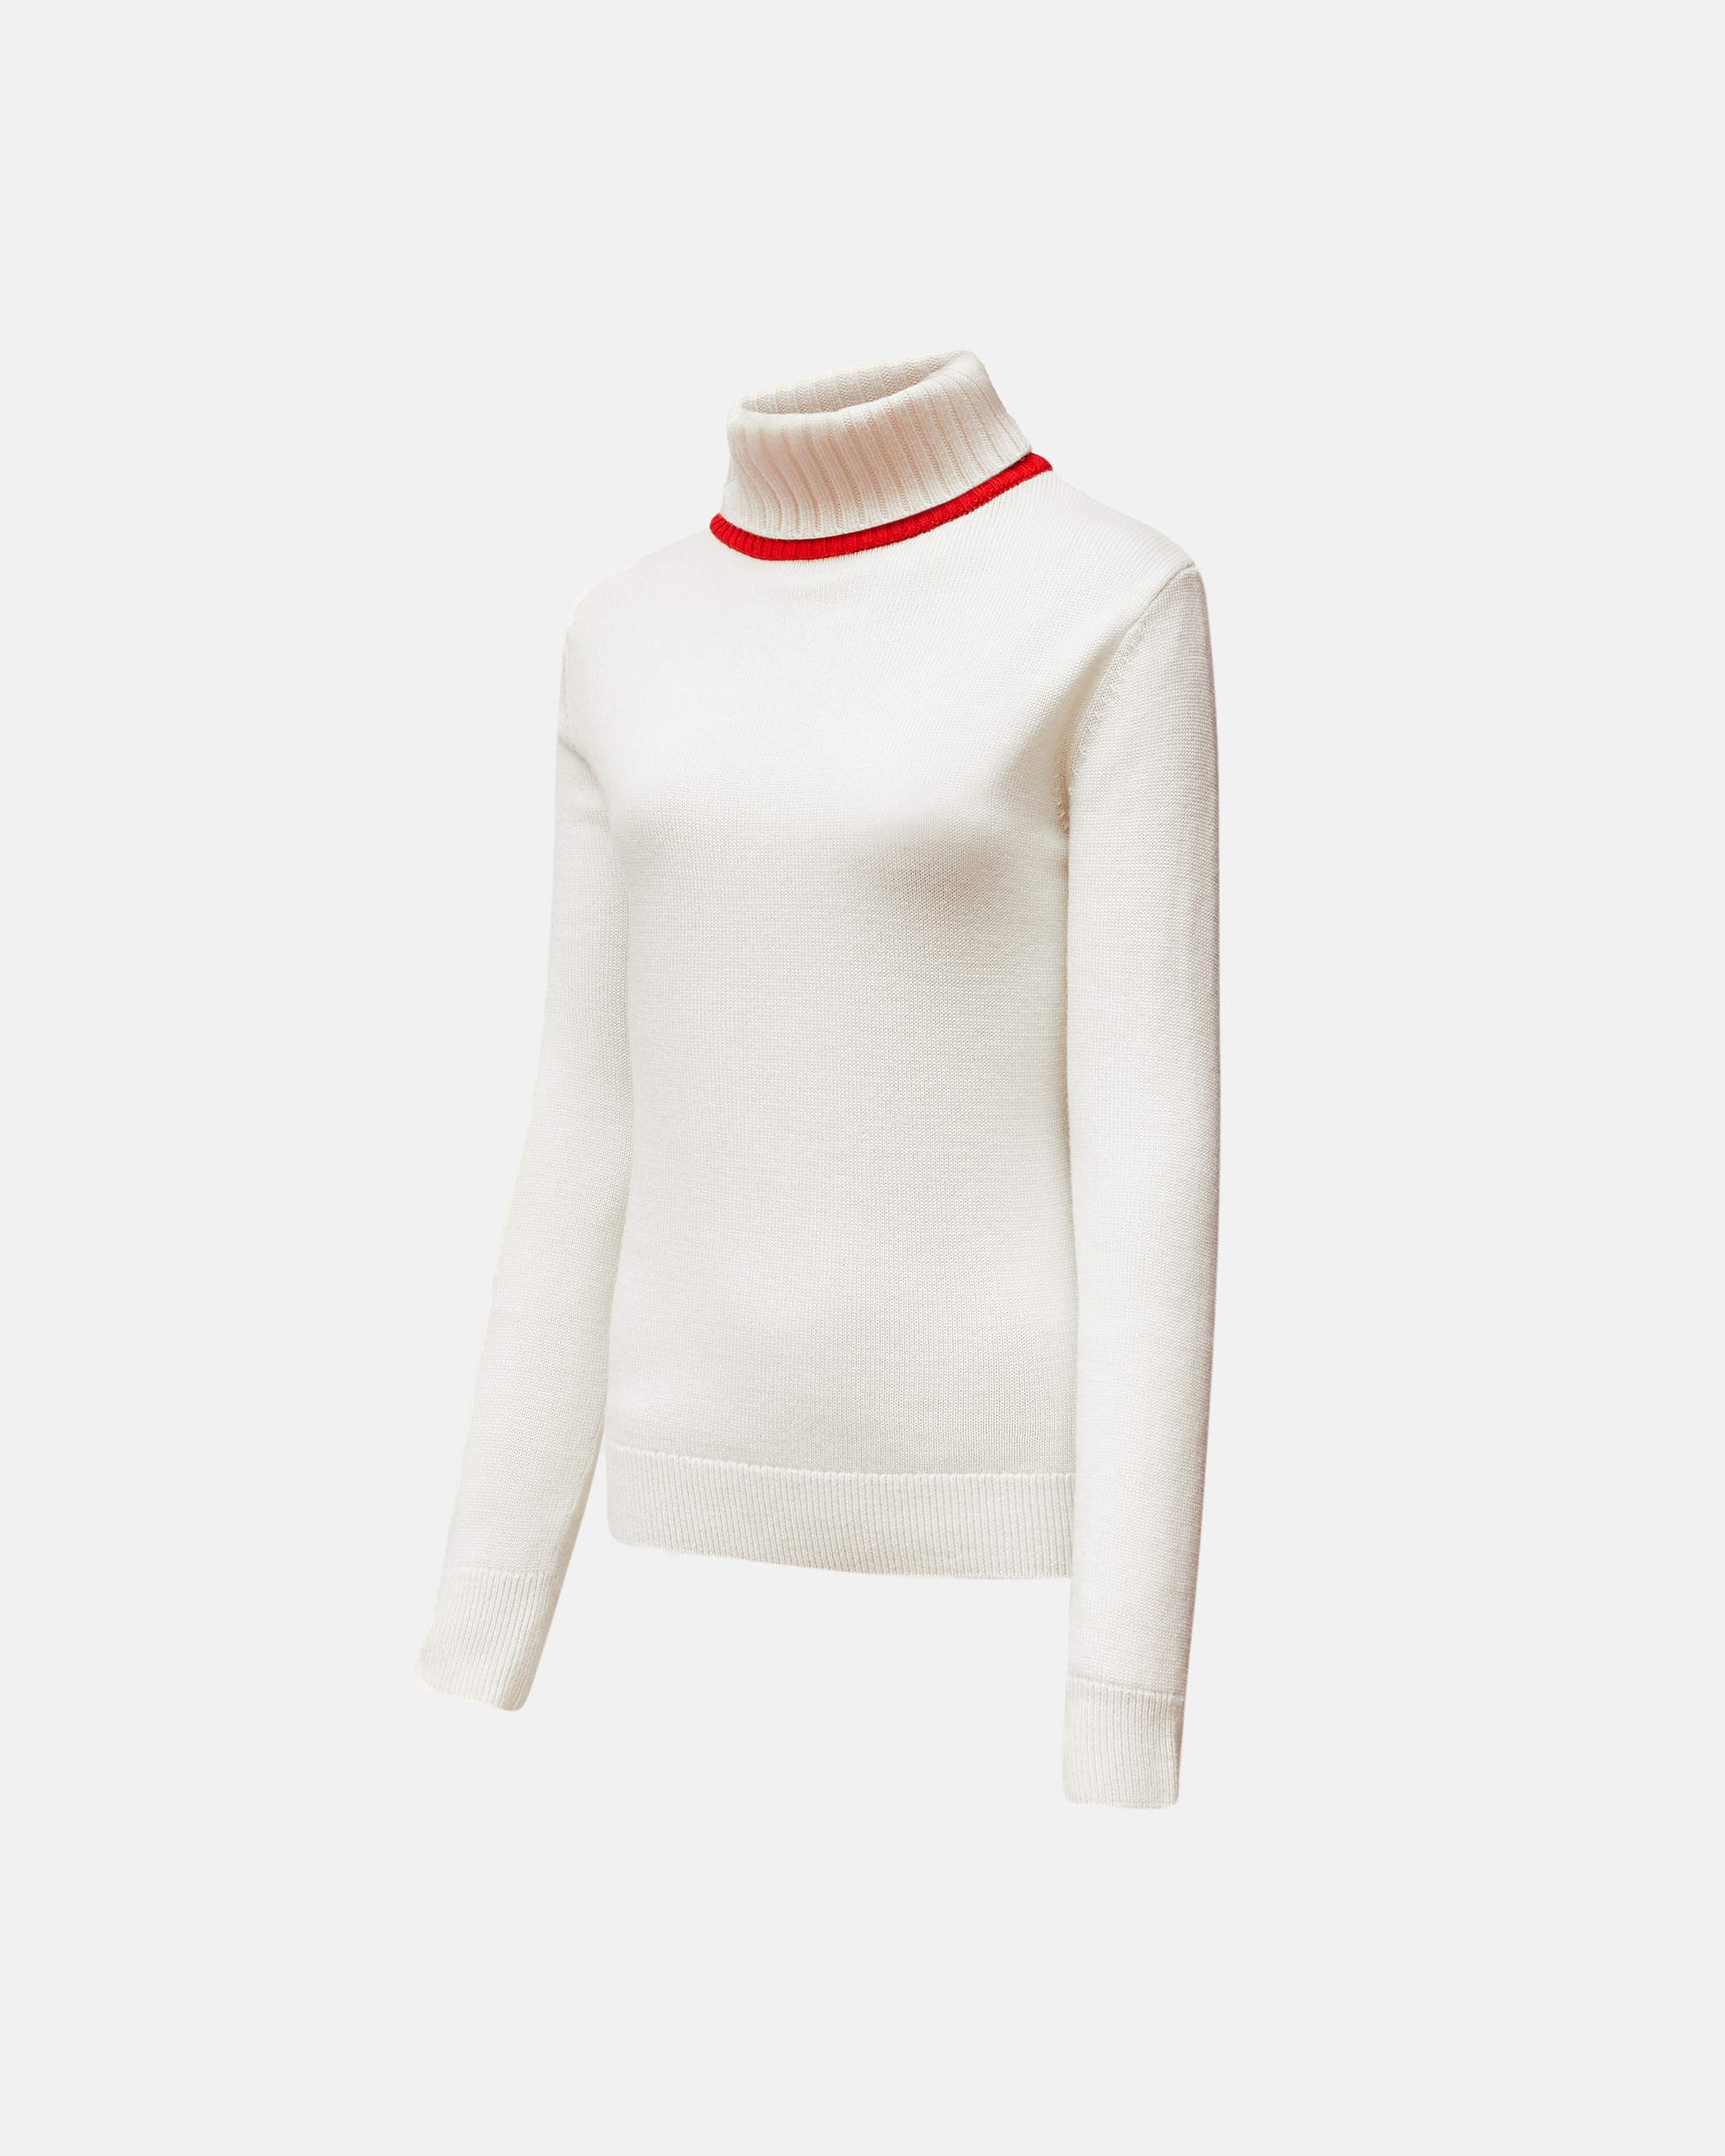 Perfect Moment Merino Wool Turtleneck Sweater Xl In Snow-white